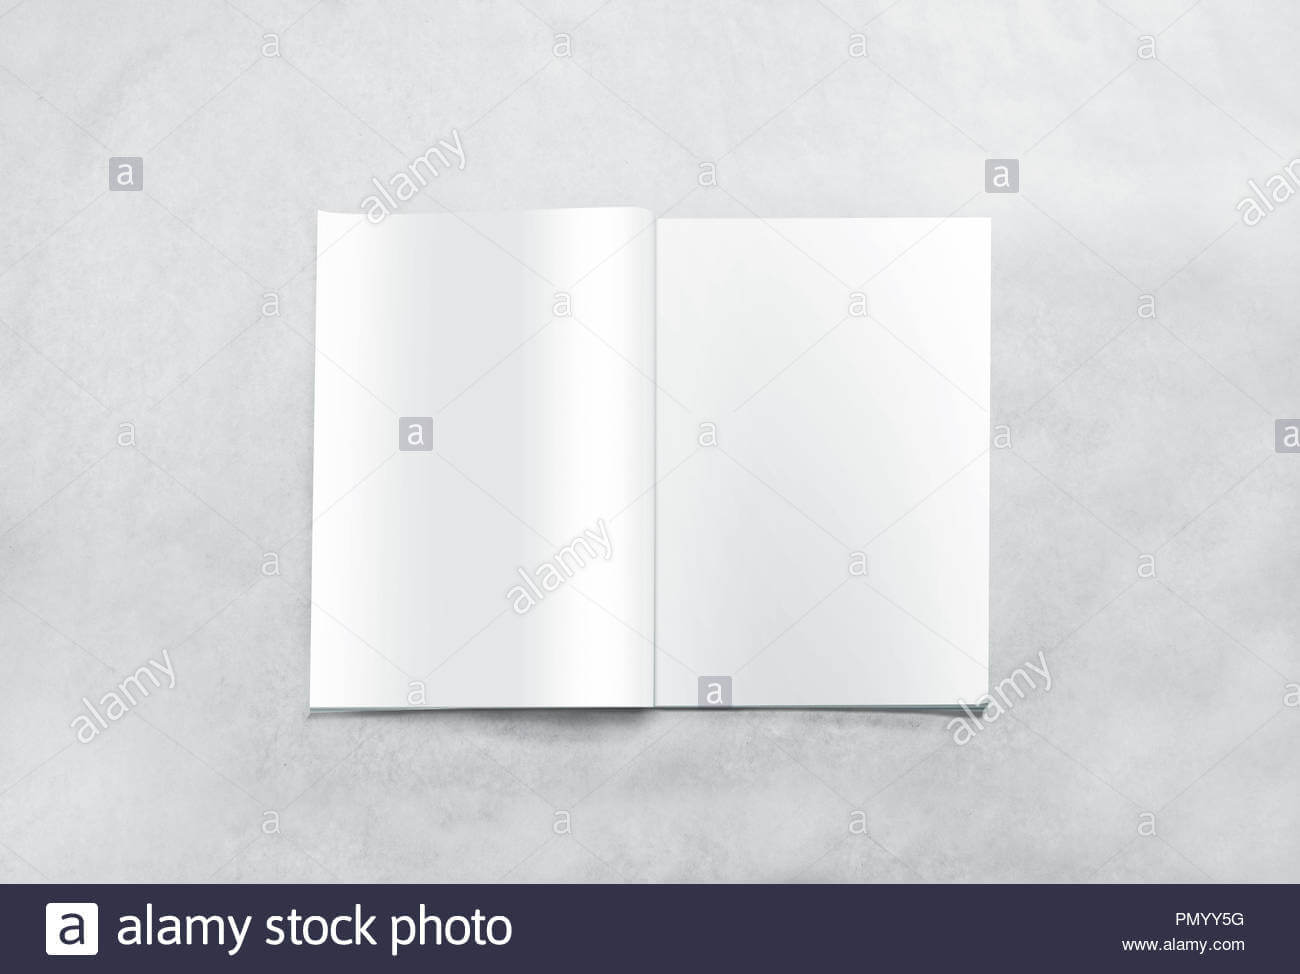 Opened Blank Magazine Pages Mockup, Isolated On Textured With Blank Magazine Spread Template